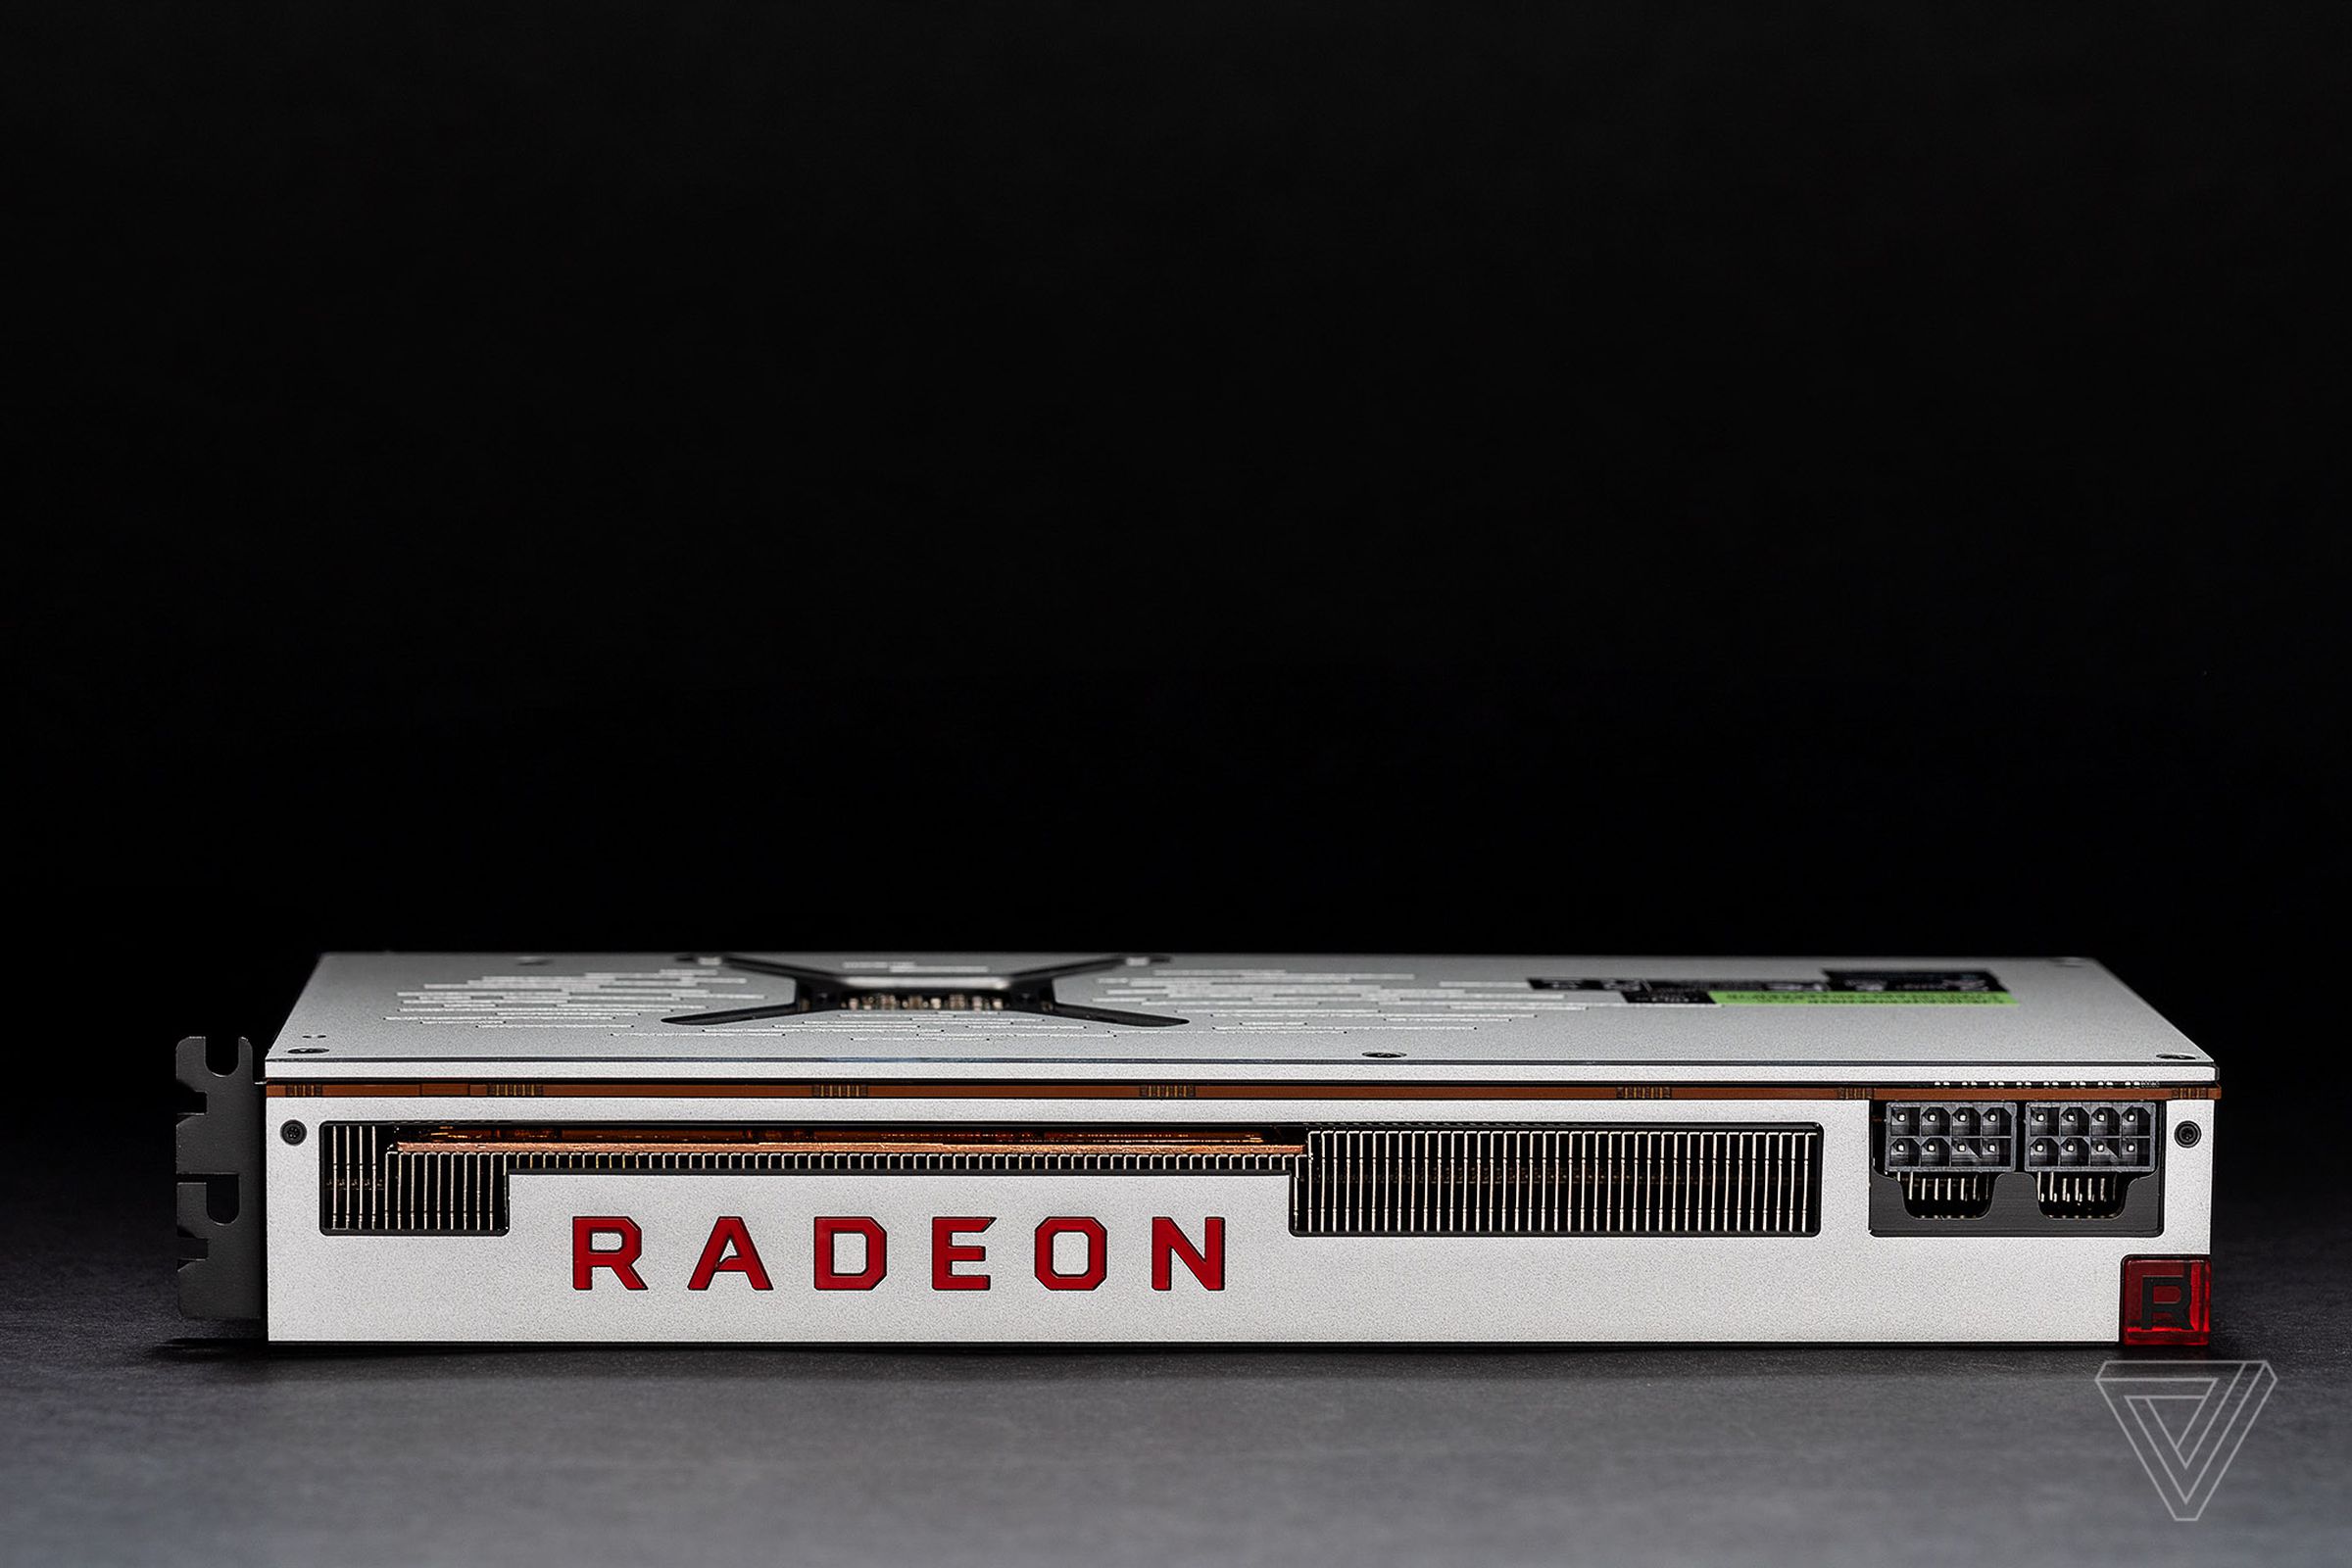 This is not Navi. It’s the existing Radeon VII.